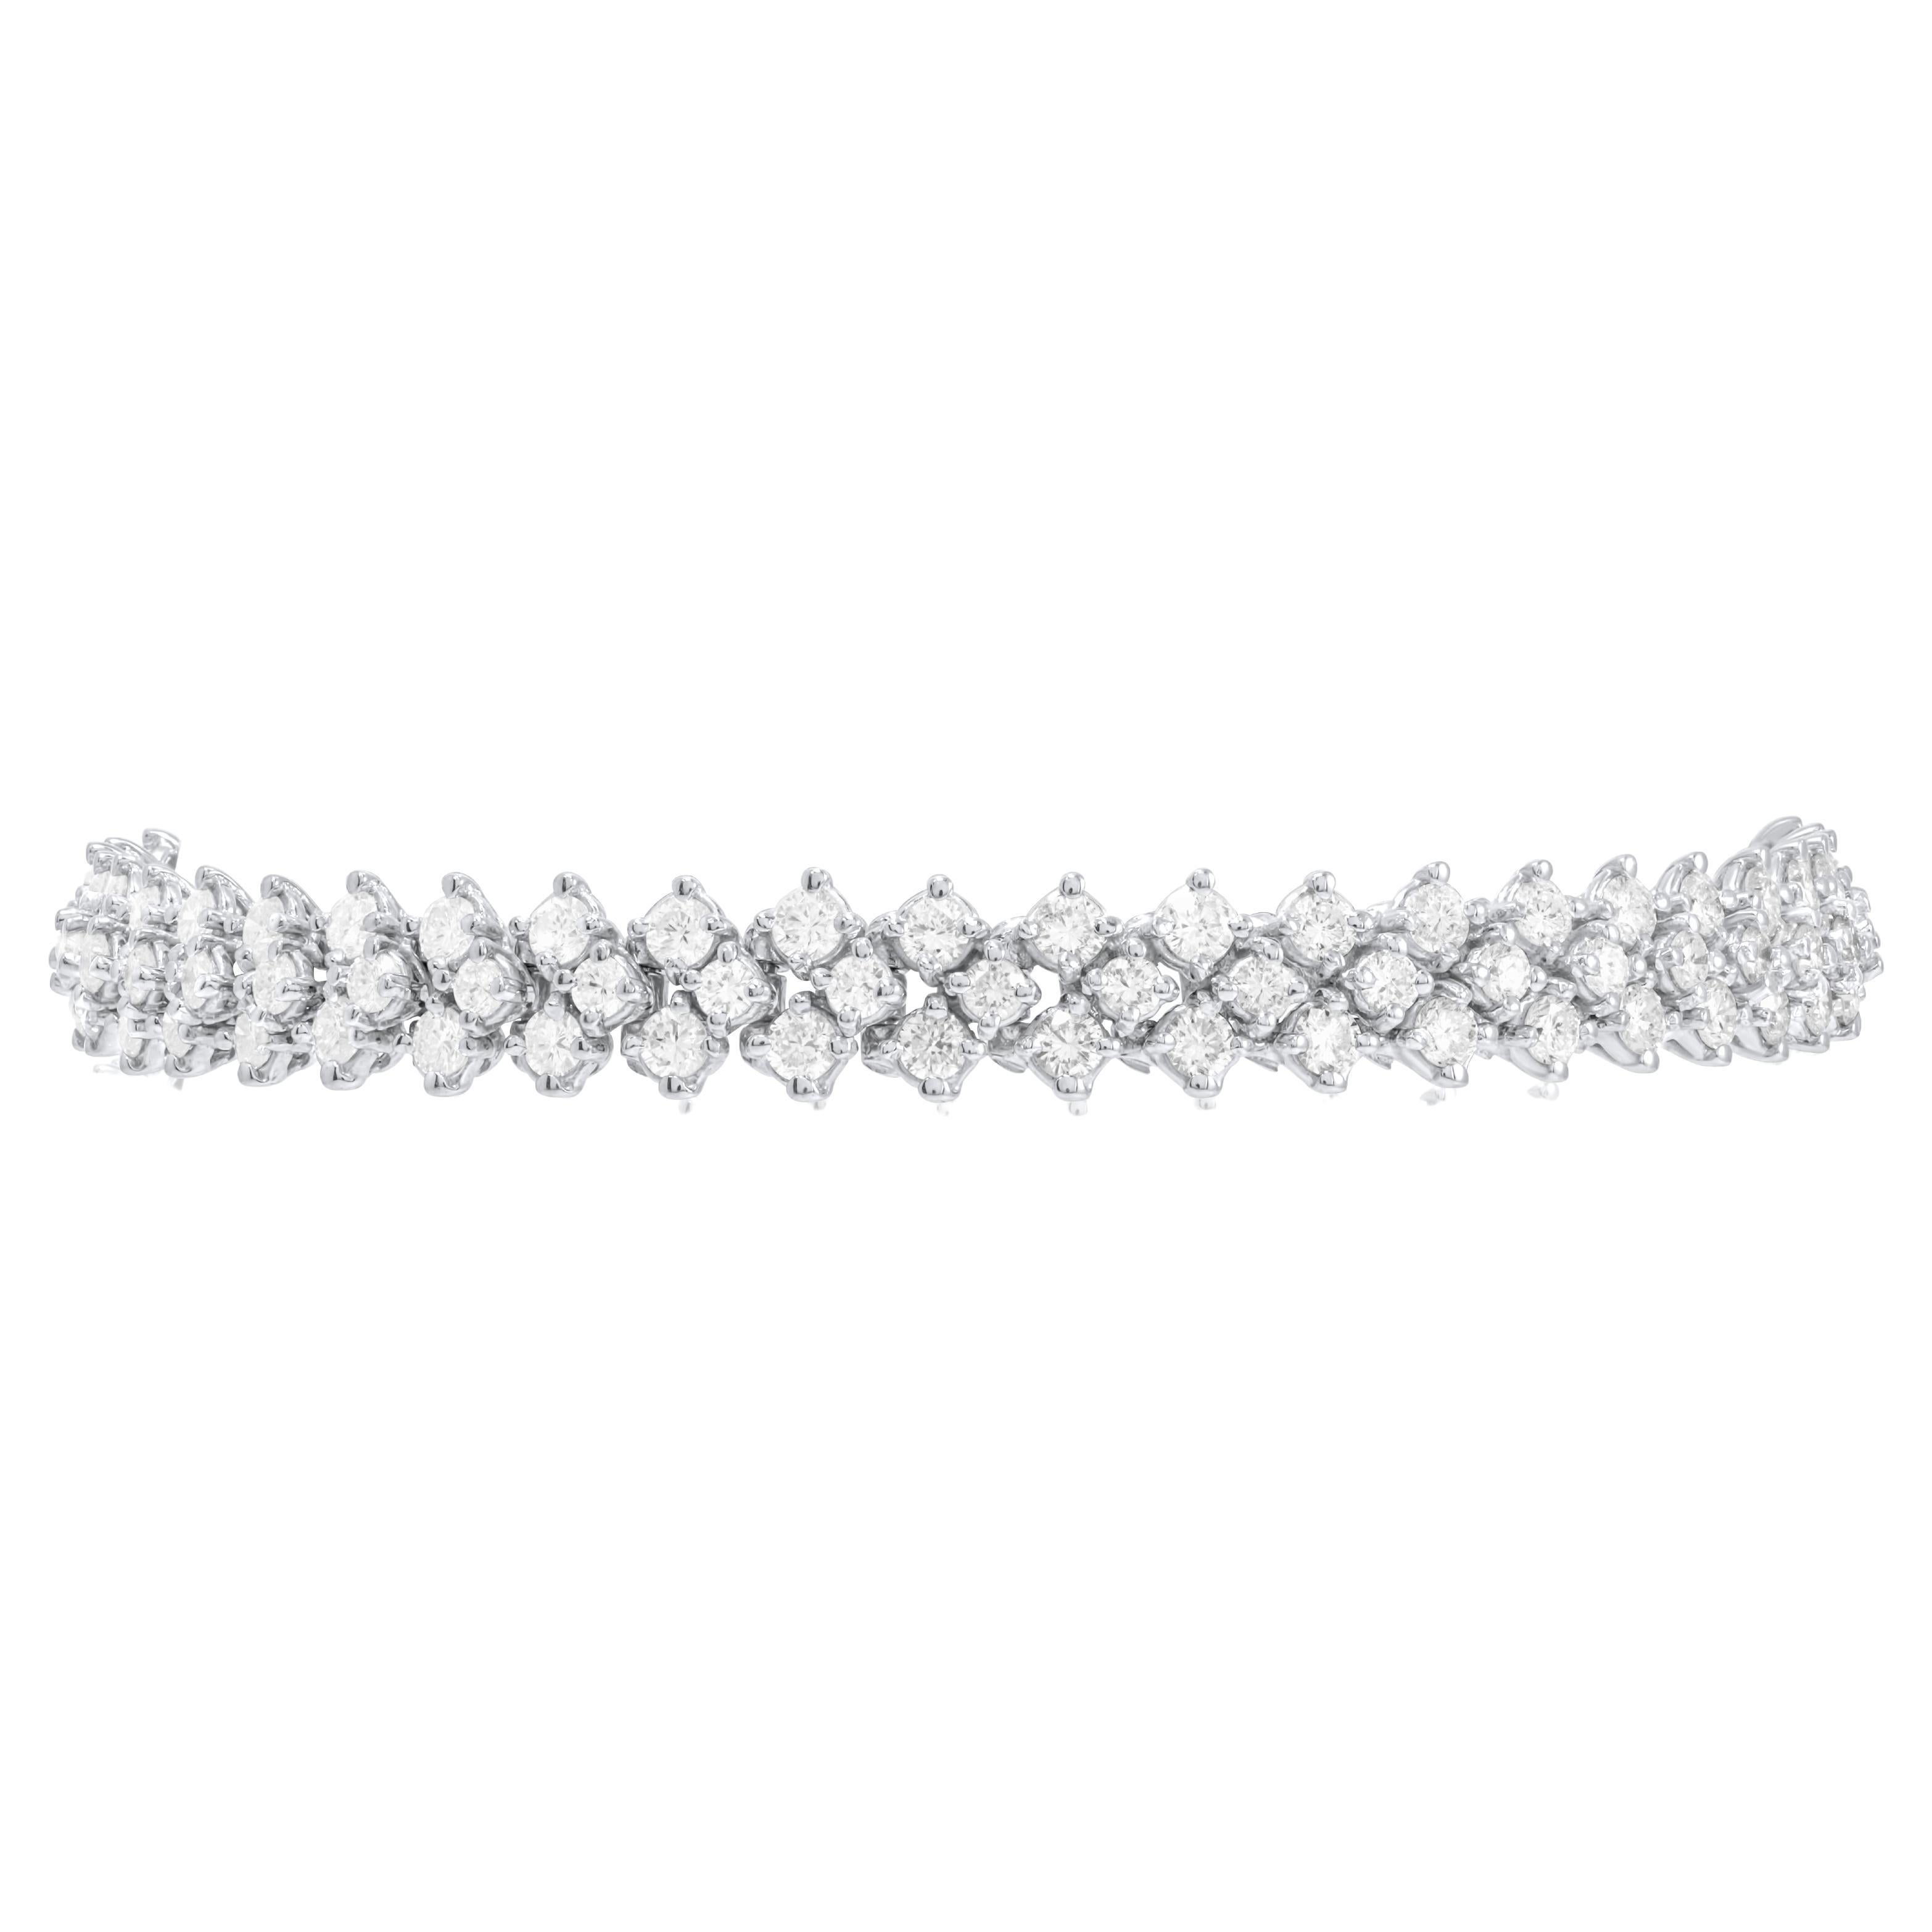 Diana M. 18kt white gold fashion bracelet featuring 3 rows of 9.00 cts diamonds